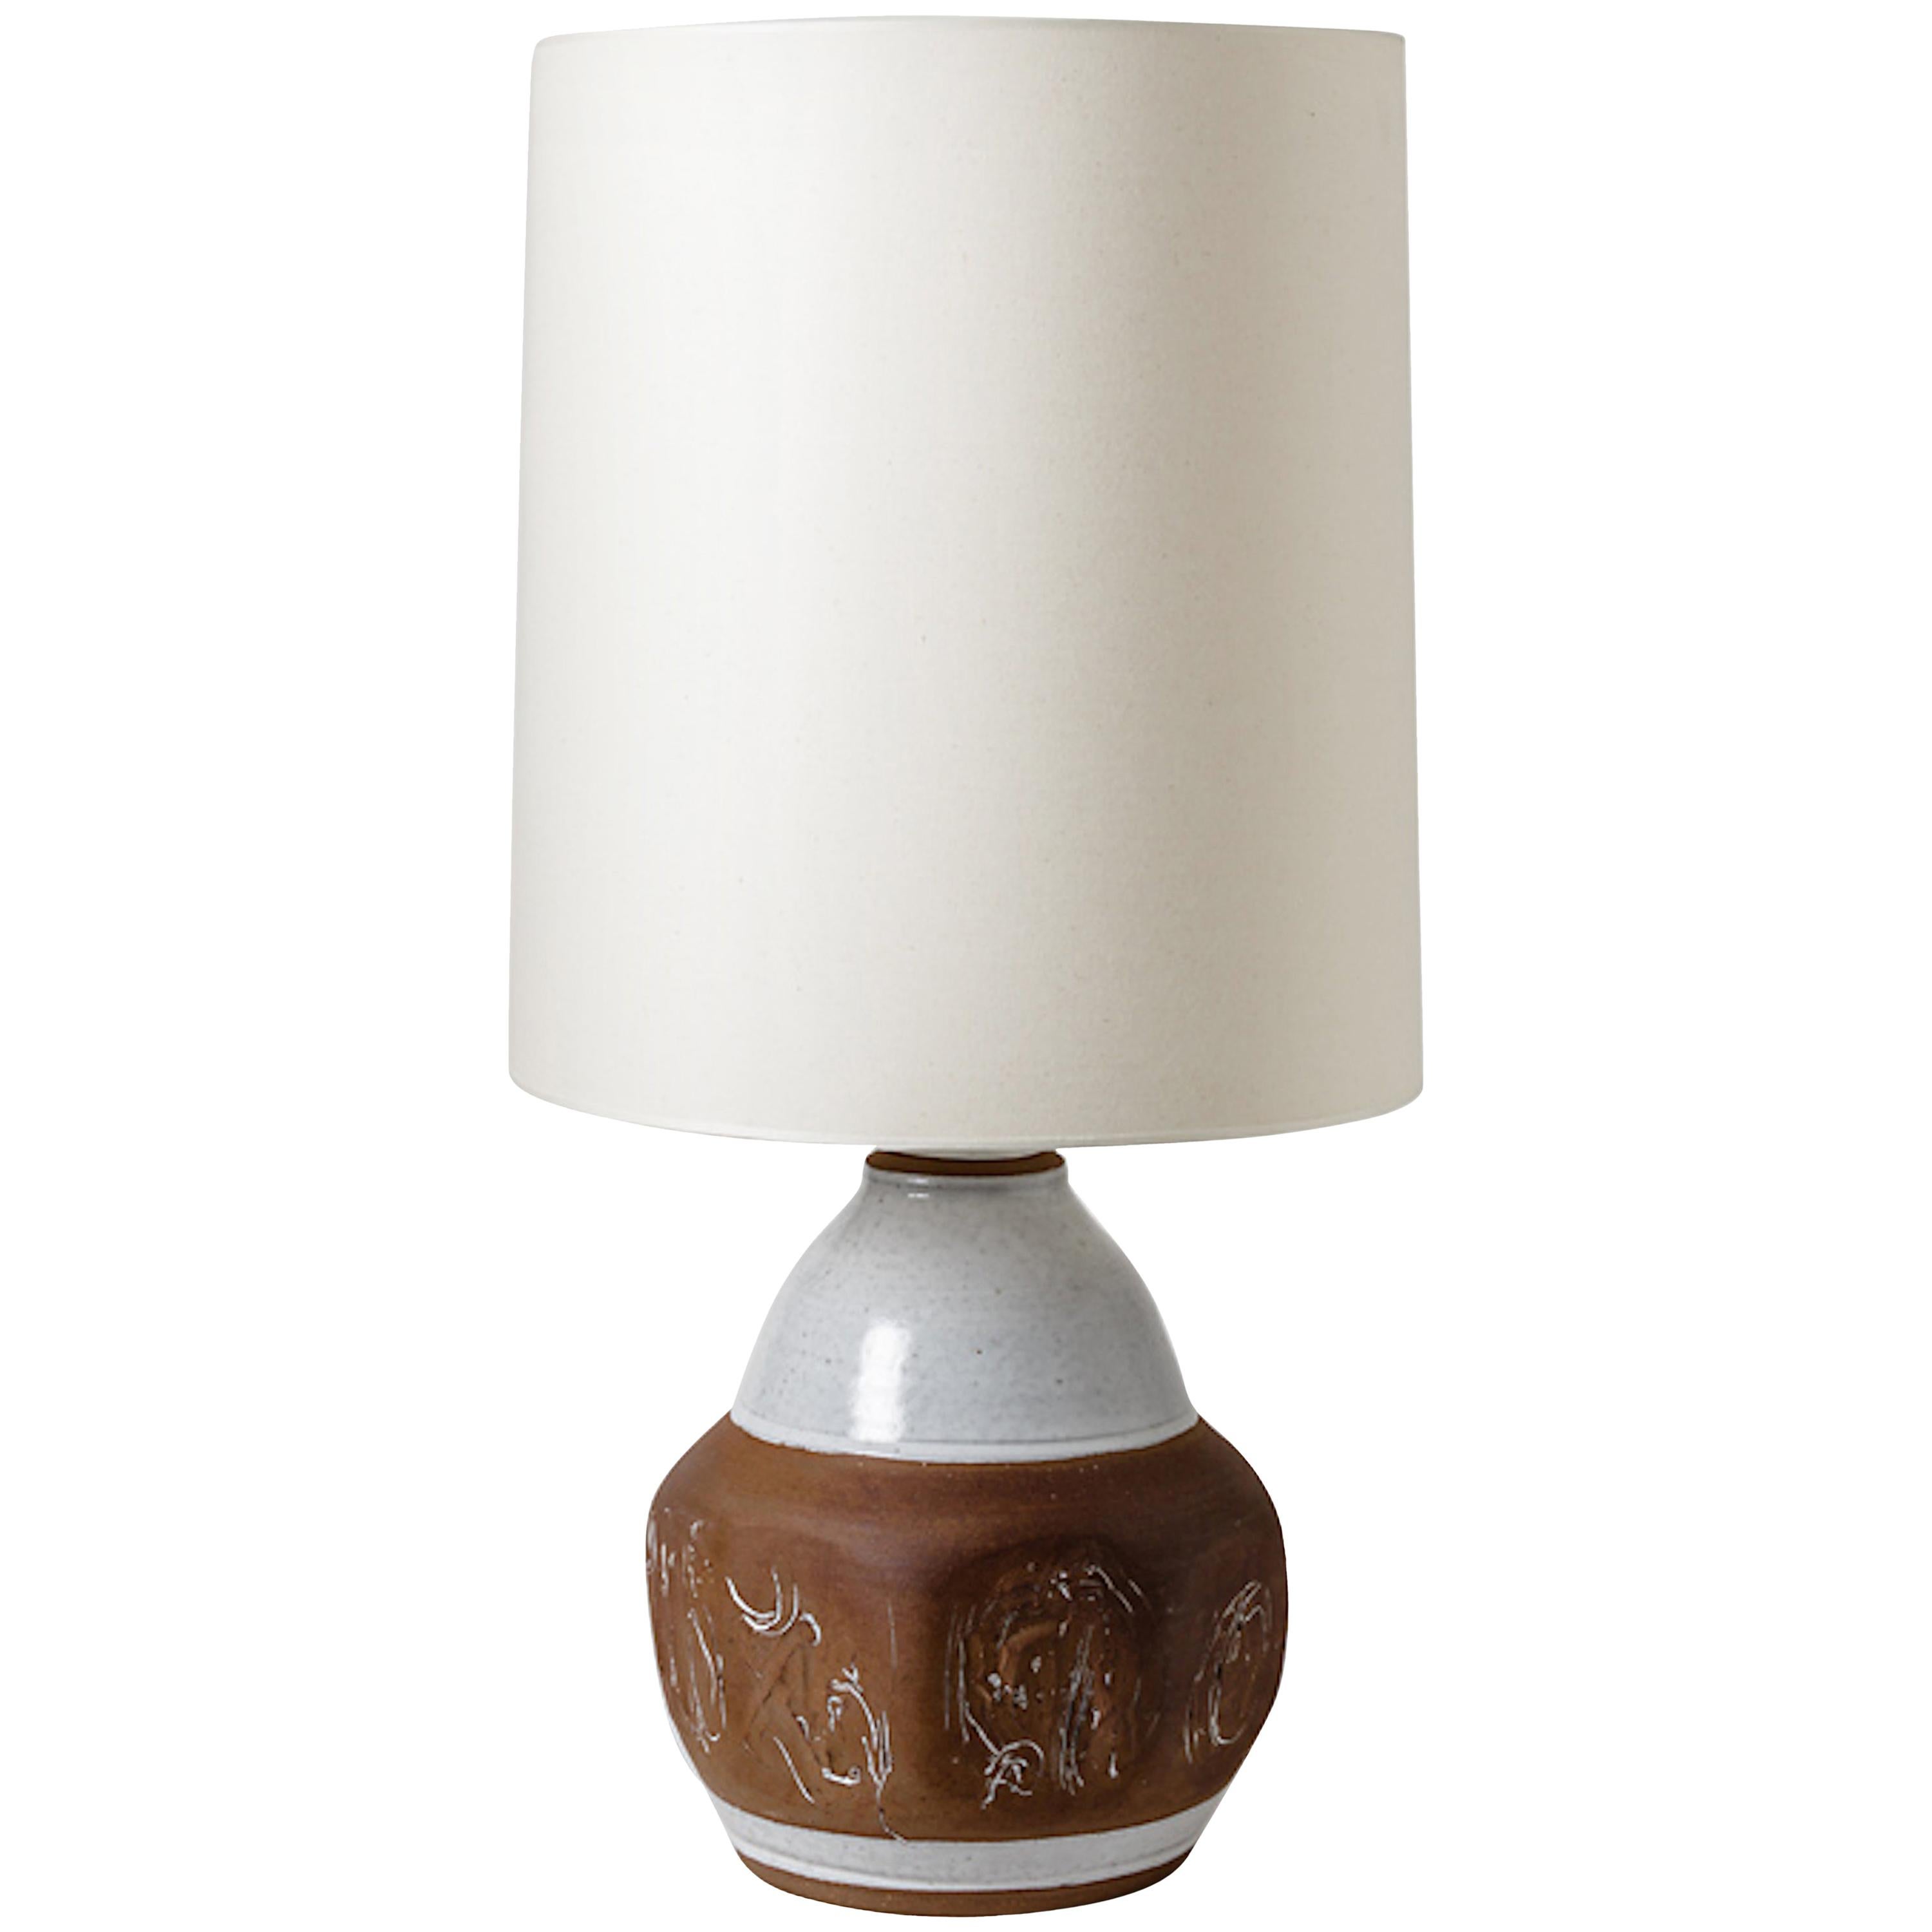 White and Brown Stoneware Ceramic Table Lamp by Roger Collet, circa 1970 For Sale